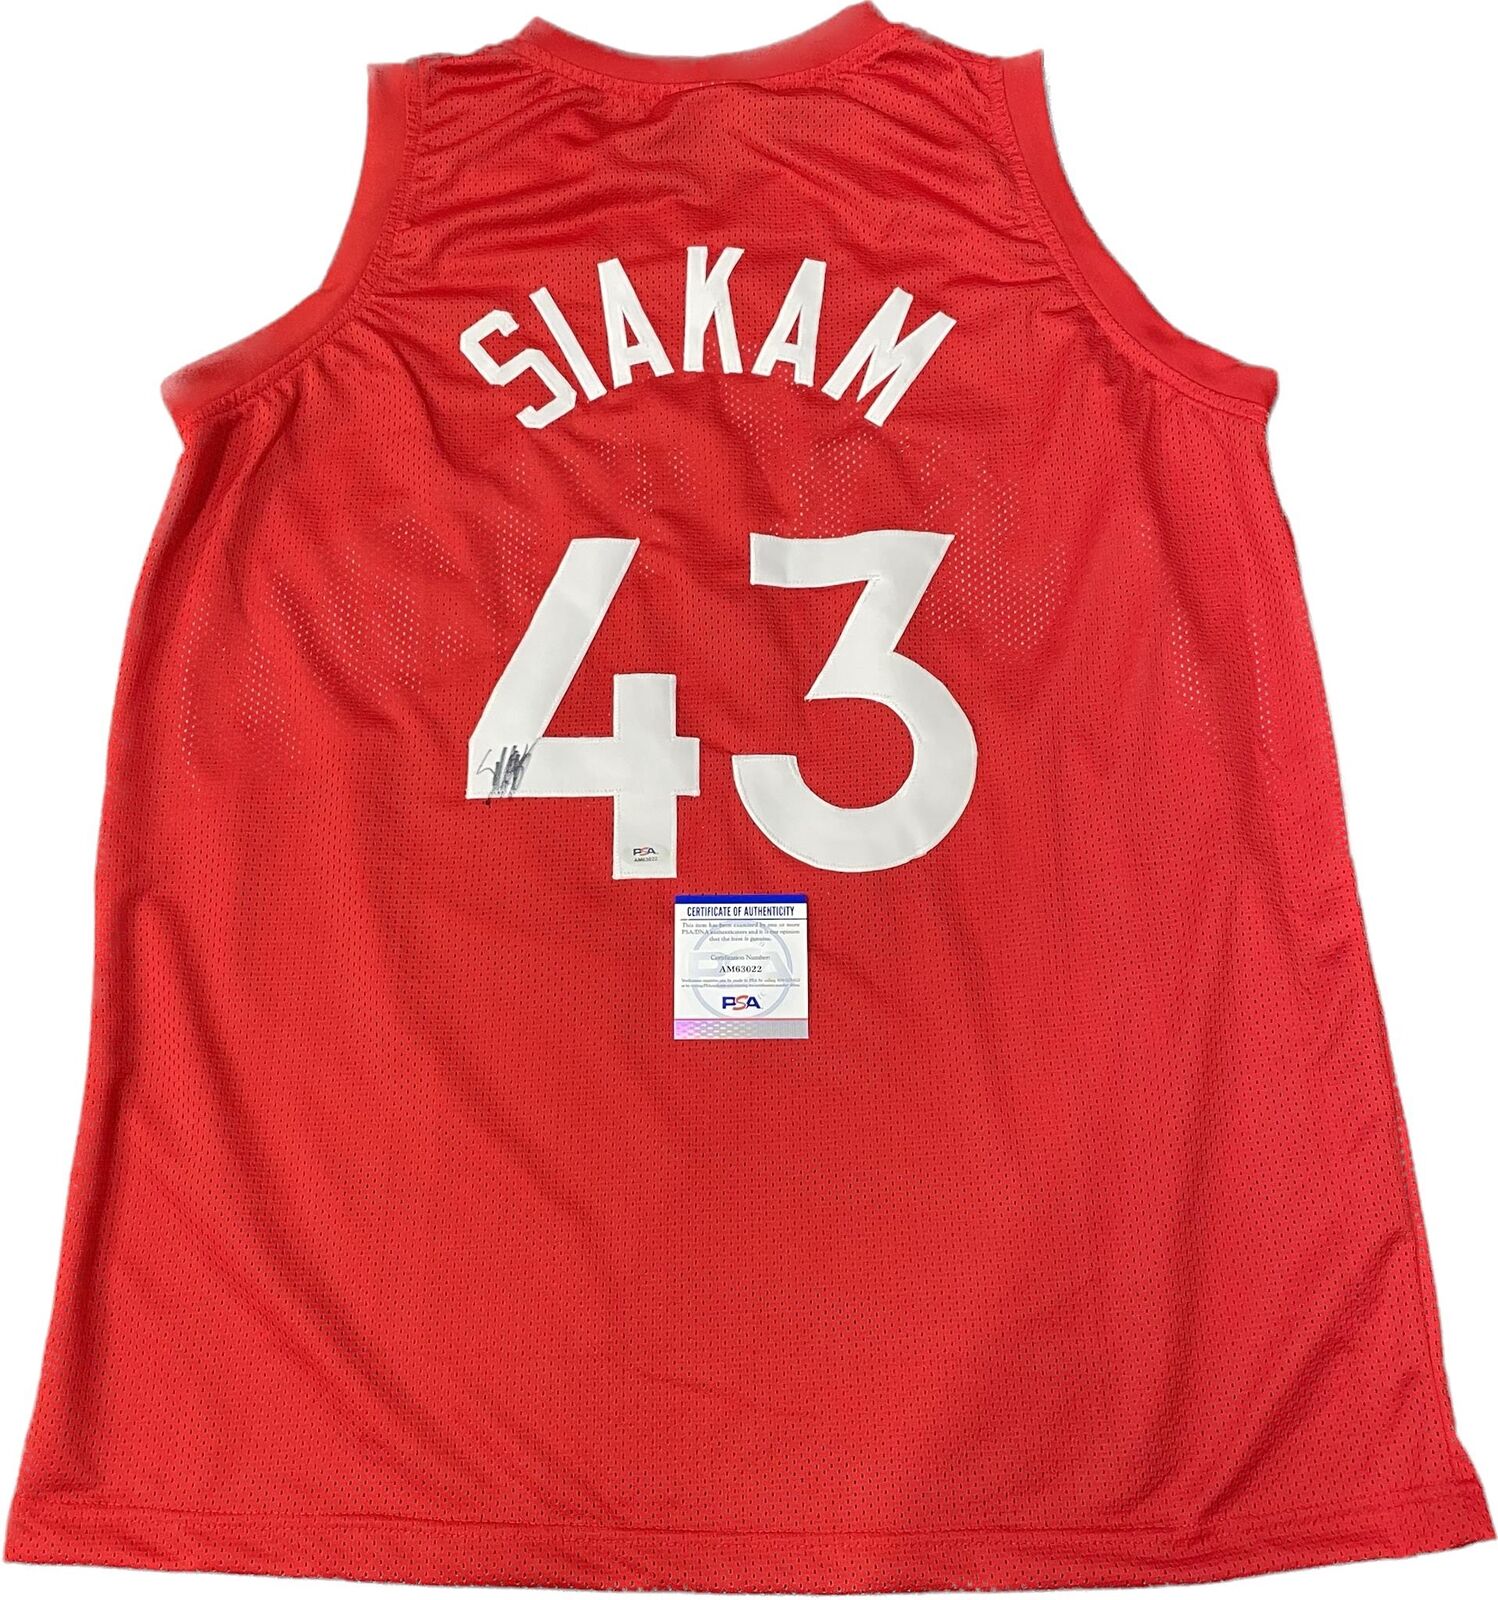 OG Anunoby signed jersey PSA/DNA Toronto Raptors Autographed at 's  Sports Collectibles Store